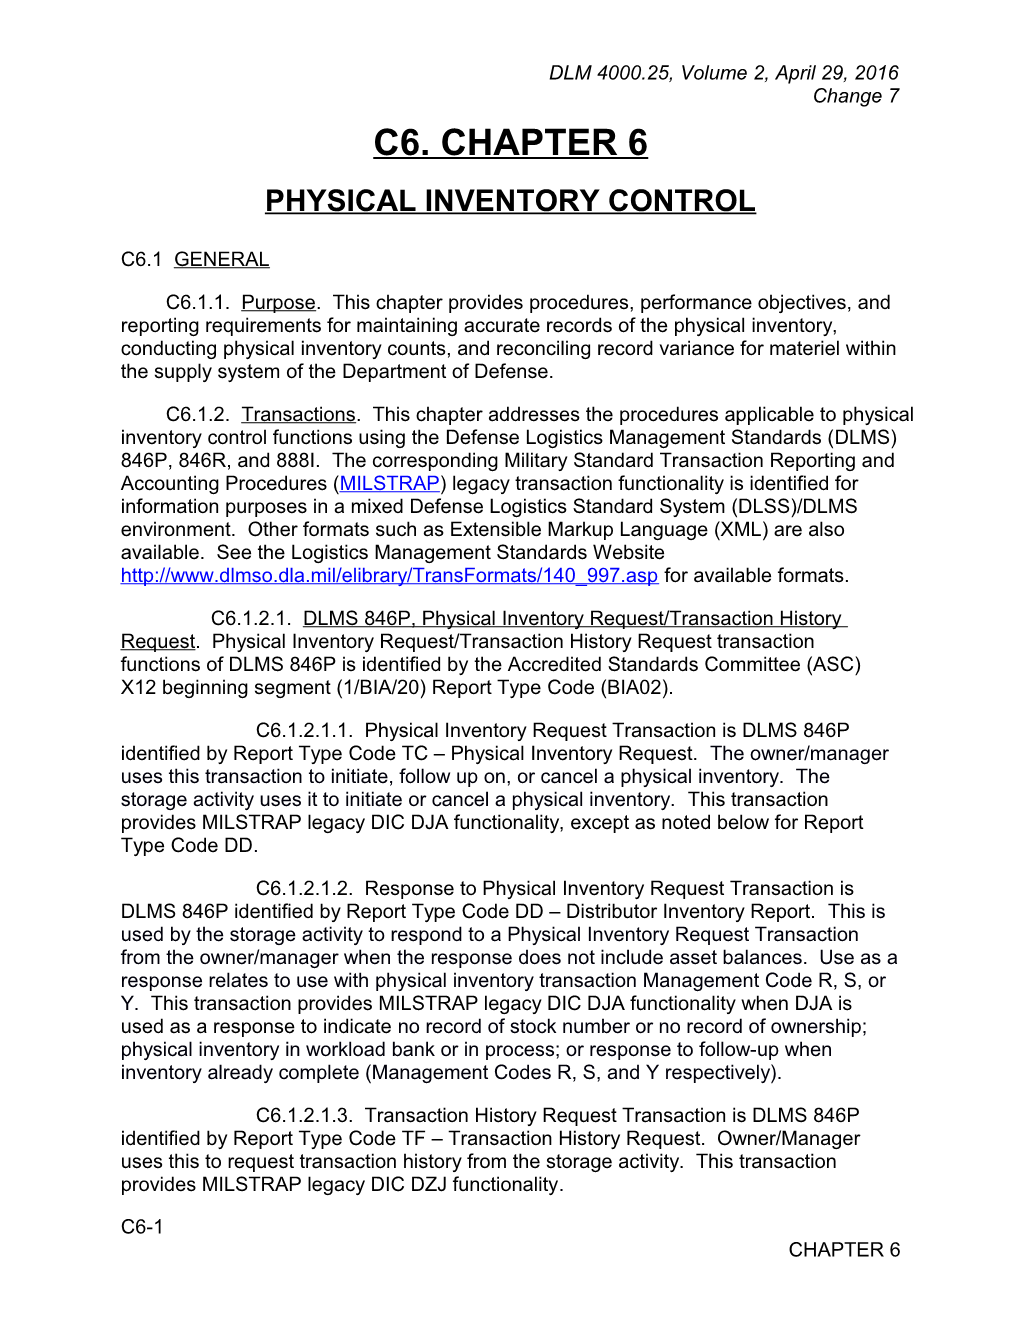 Chapter 6 - Physical Inventory Control